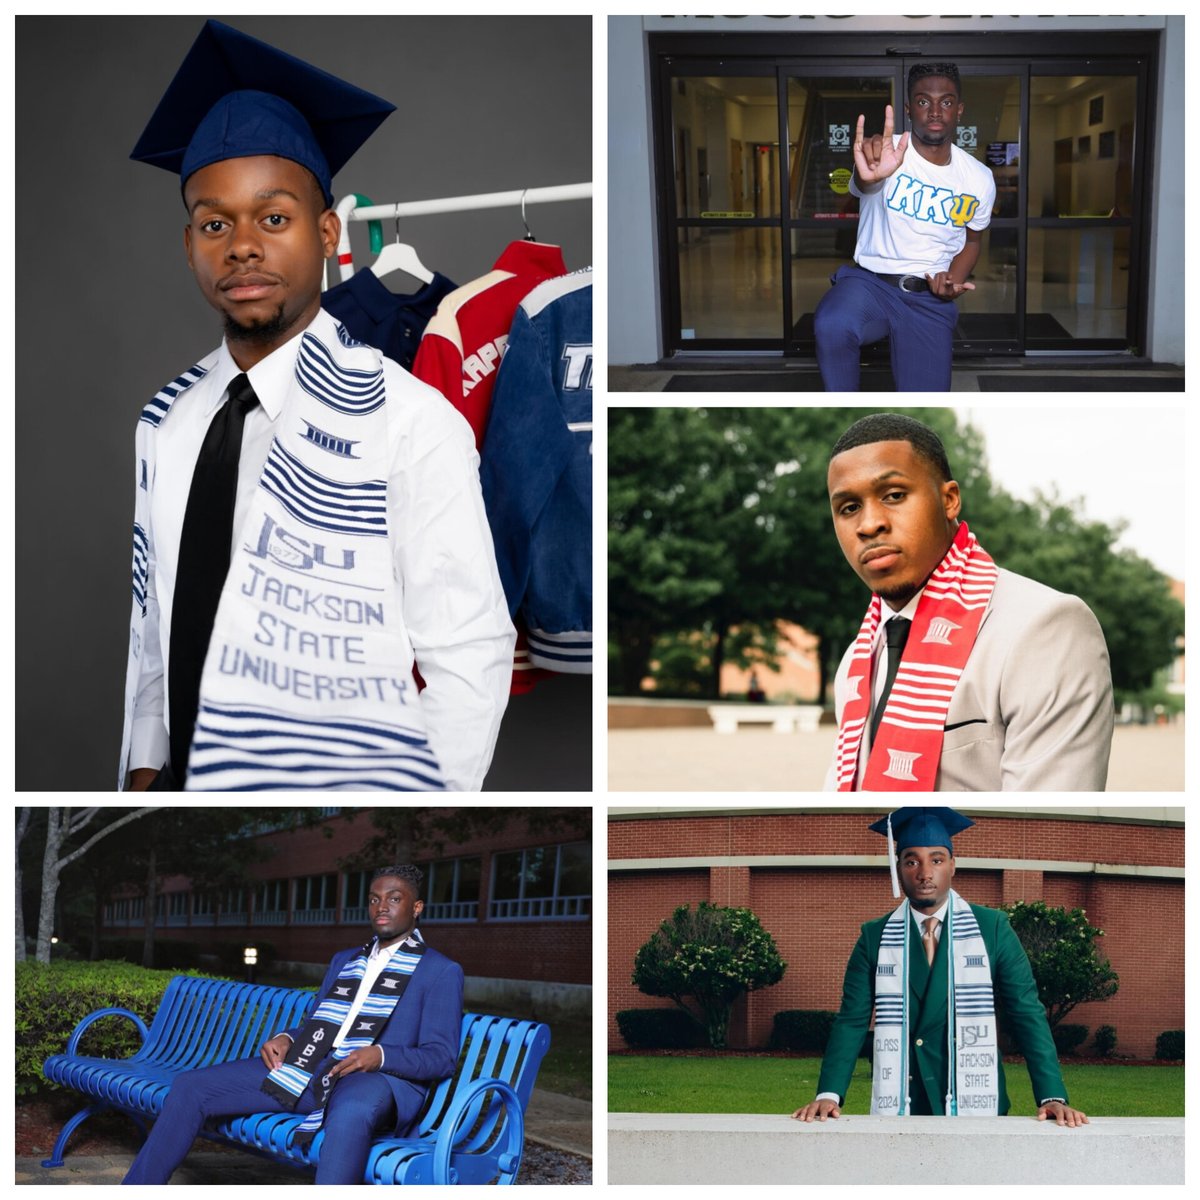 #JSUGrad24: Jackson State University is the #1 producer of Black men with Baccalaureate, Masters and Doctoral degrees in Mississippi. Salute. ✊🏿 #TheeILove @JacksonStateU